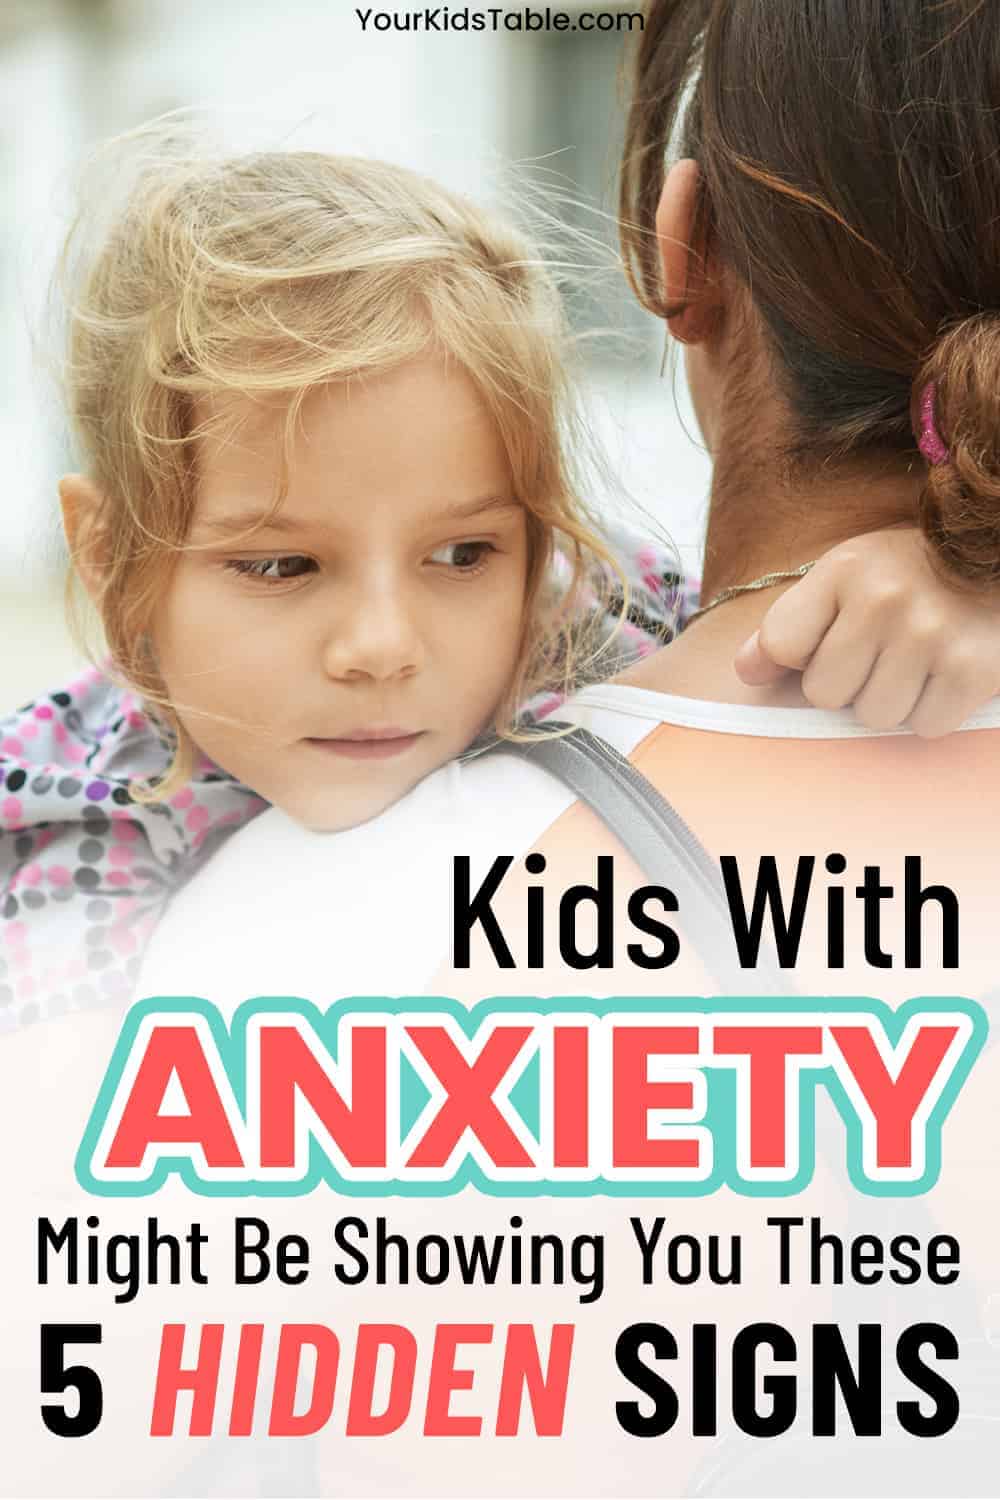 Could your child have anxiety? Learn 5 sneaky signs of anxiety in children from an expert therapist so you can help your child.